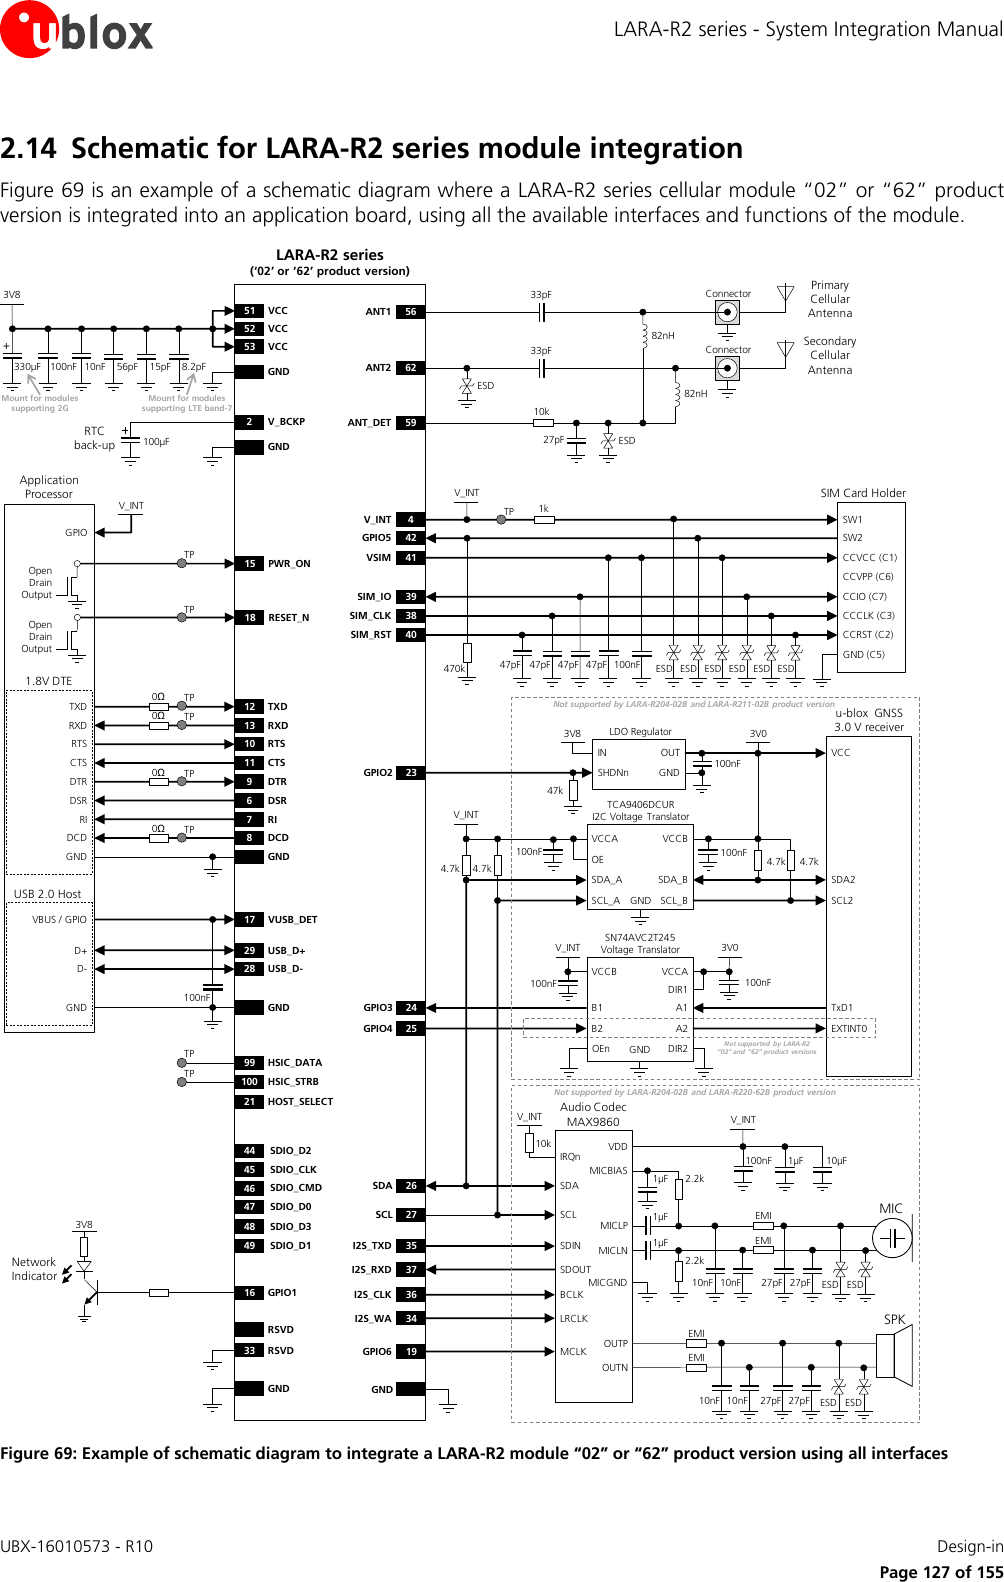 LARA-R2 series - System Integration Manual UBX-16010573 - R10    Design-in     Page 127 of 155 2.14 Schematic for LARA-R2 series module integration Figure 69 is an example of a schematic diagram where a LARA-R2 series cellular module “02” or “62” product version is integrated into an application board, using all the available interfaces and functions of the module.  TXDRXDRTSCTSDTRDSRRIDCDGND12 TXD9DTR13 RXD10 RTS11 CTS6DSR7RI8DCDGND3V8GND330µF 10nF100nF 56pFLARA-R2 series(‘02’ or ‘62’ product version)52 VCC53 VCC51 VCC+100µF2V_BCKPGND GNDGNDRTC back-up1.8V DTEUSB 2.0 Host18 RESET_NApplication ProcessorOpen Drain Output15 PWR_ONOpen Drain OutputD+D-29 USB_D+28 USB_D-15pFTPTP0Ω0ΩTPTP0Ω0ΩTPTP47pFSIM Card HolderCCVCC (C1)CCVPP (C6)CCIO (C7)CCCLK (C3)CCRST (C2)GND (C5)47pF 47pF 100nF41VSIM39SIM_IO38SIM_CLK40SIM_RST47pFSW1 SW24V_INT42GPIO5470k ESD ESD ESD ESD ESD ESD1kTPV_INTSDIO_CMDSDIO_D0SDIO_D3SDIO_D146474849SDIO_D2SDIO_CLK4445VBUS / GPIO 17 VUSB_DET100nF62ANT259ANT_DET10kConnector27pF ESDSecondary Cellular  Antenna33pF82nH82nH56Connector Primary Cellular Antenna33pFANT1GND16 GPIO13V8Network IndicatorRSVD33 RSVD99 HSIC_DATA100 HSIC_STRB21 HOST_SELECTTPTP8.2pFMount for modules supporting 2GMount for modules supporting LTE band-7ESDV_INTBCLKLRCLKAudio Codec MAX9860SDINSDOUTSDASCL36I2S_CLK34I2S_WA35I2S_TXD37I2S_RXD19GPIO6 MCLKIRQn10k10µF1µF100nFVDDSPKOUTPOUTNMICMICBIAS 1µF 2.2k1µF1µFMICLNMICLPMICGND2.2kESD ESDV_INT10nF10nFEMIEMI27pF27pF10nFEMIEMIESD ESD27pF27pF10nF24GPIO3V_INTB1  A1GNDB2 A2VCCB VCCASN74AVC2T245 Voltage Translator100nF100nF3V0TxD14.7kIN OUTLDO RegulatorSHDNn4.7k3V8 3V023GPIO2V_INTSDA_A  SDA_BGNDSCL_A SCL_BVCCA VCCBTCA9406DCURI2C Voltage Translator100nF100nF100nF47kSDA2SCL2VCCDIR1DIR2OEnOEGNDEXTINT0GPIO4 254.7k4.7ku-blox  GNSS3.0 V receiver26SDA27SCLGNDNot supported by LARA-R204-02B and LARA-R211-02B product versionNot supported by LARA-R204-02B and LARA-R220-62B  product versionNot supported  by LARA-R2 “02” and “62” product versionsGPIOV_INT Figure 69: Example of schematic diagram to integrate a LARA-R2 module “02” or “62” product version using all interfaces  